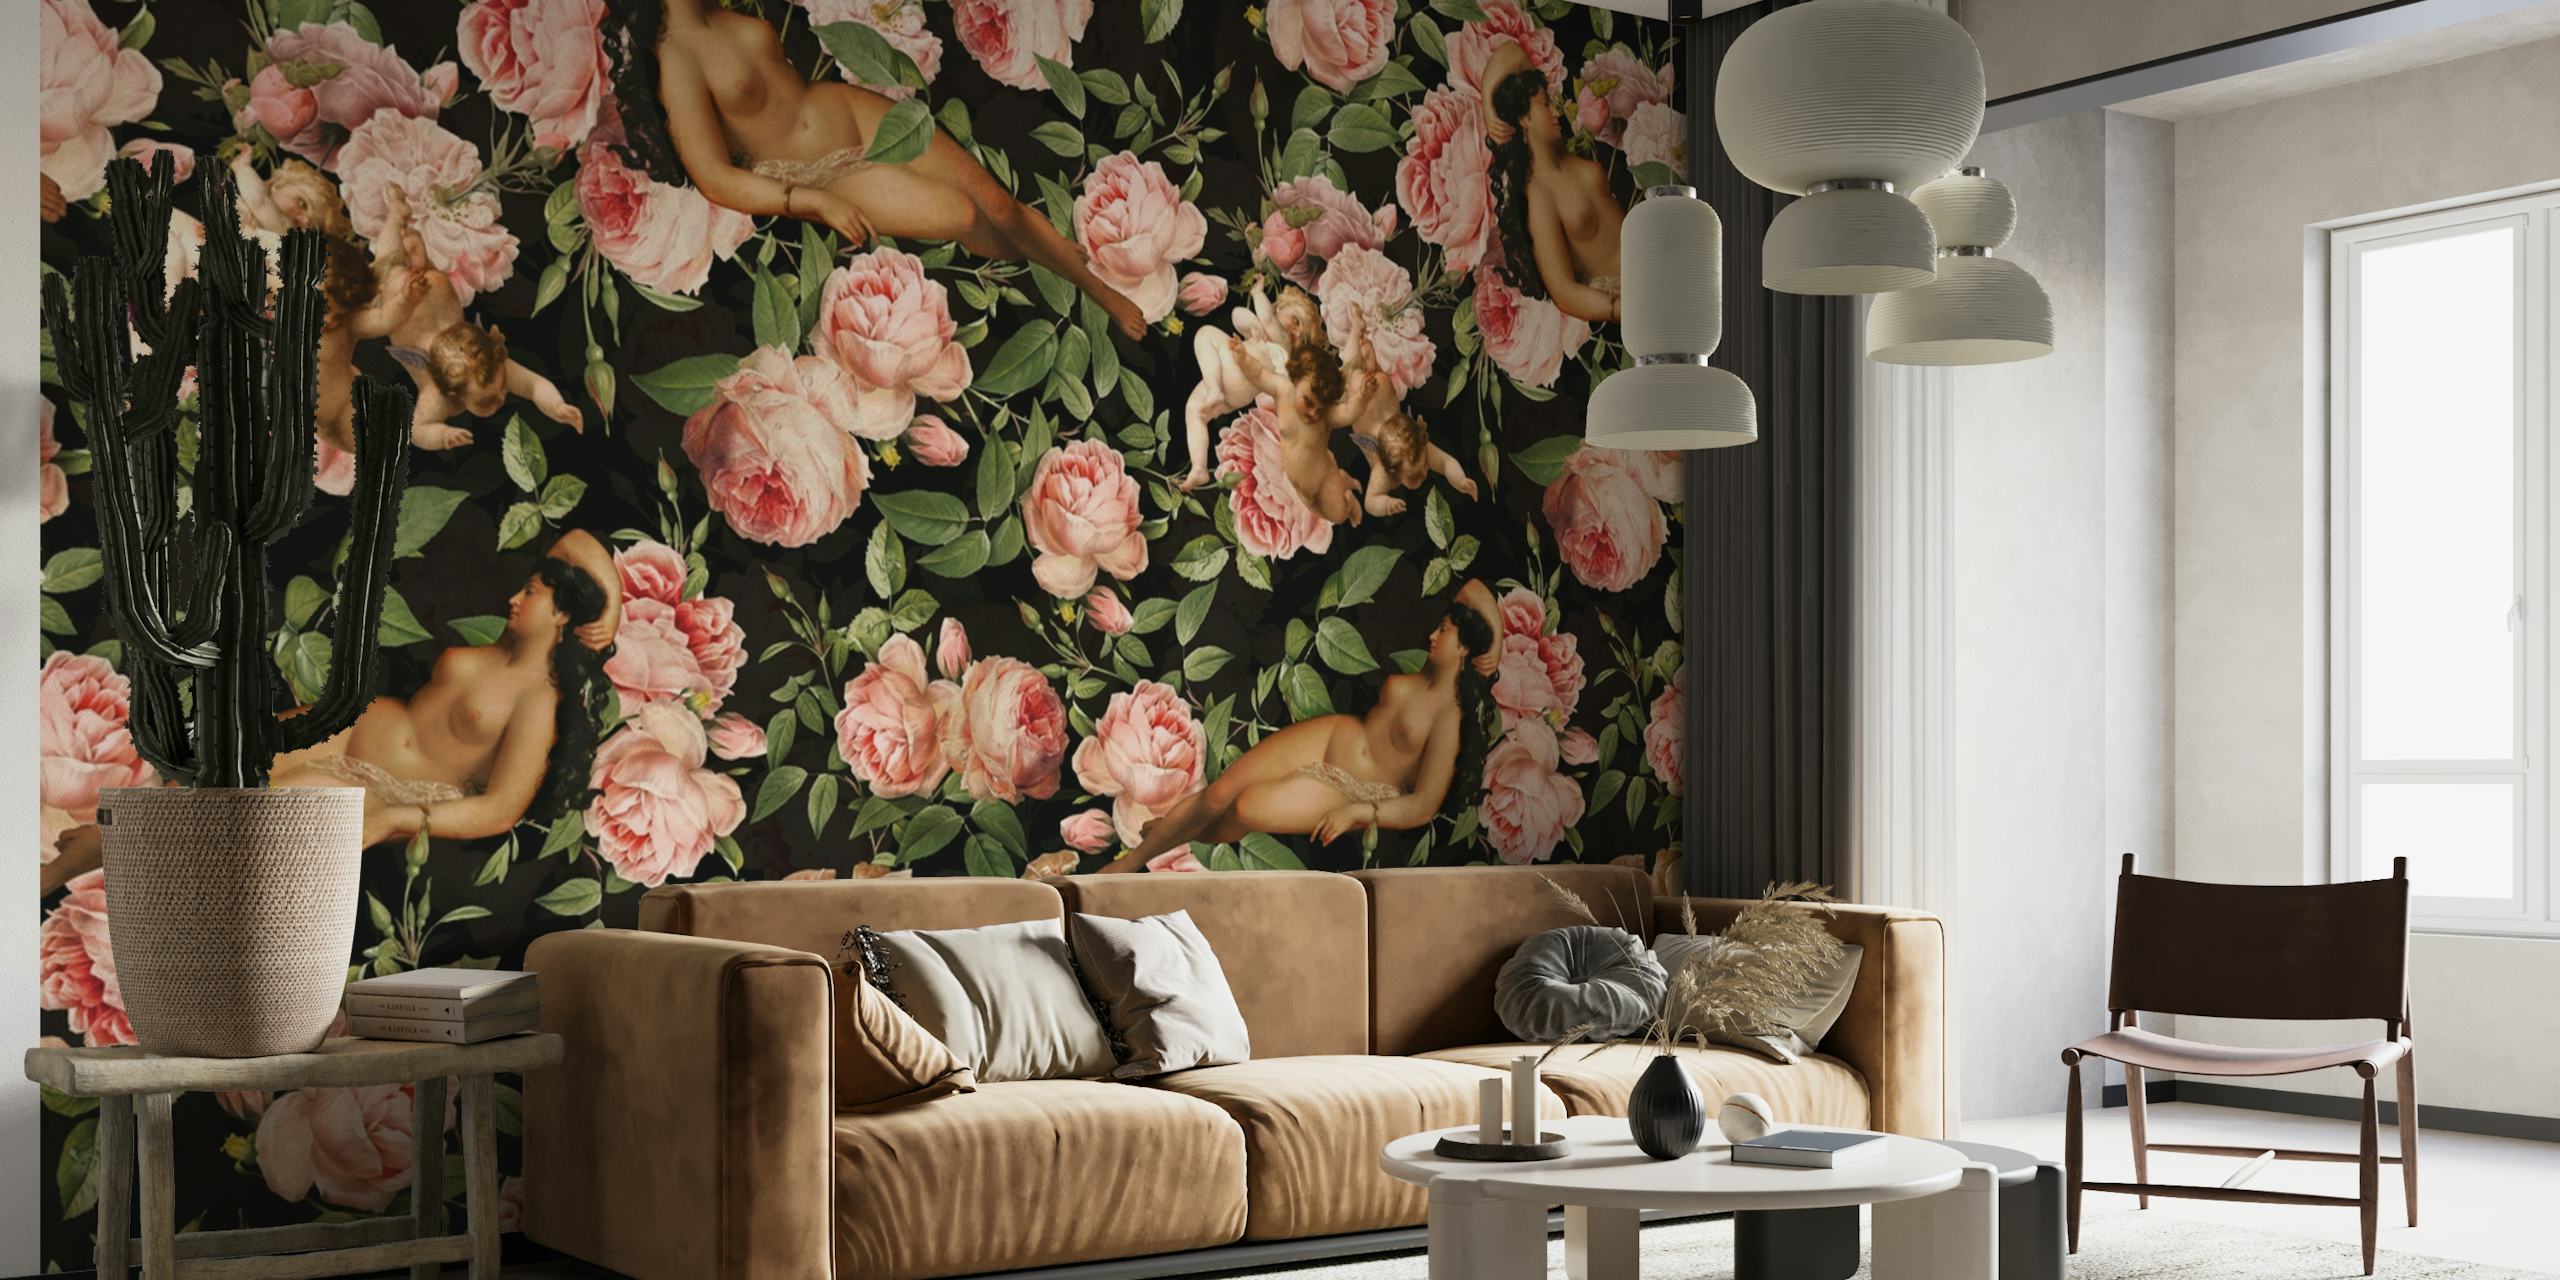 Baroque-style wall mural featuring Venus and an angel amidst blooming roses on a dark background for a romantic and luxurious feel.